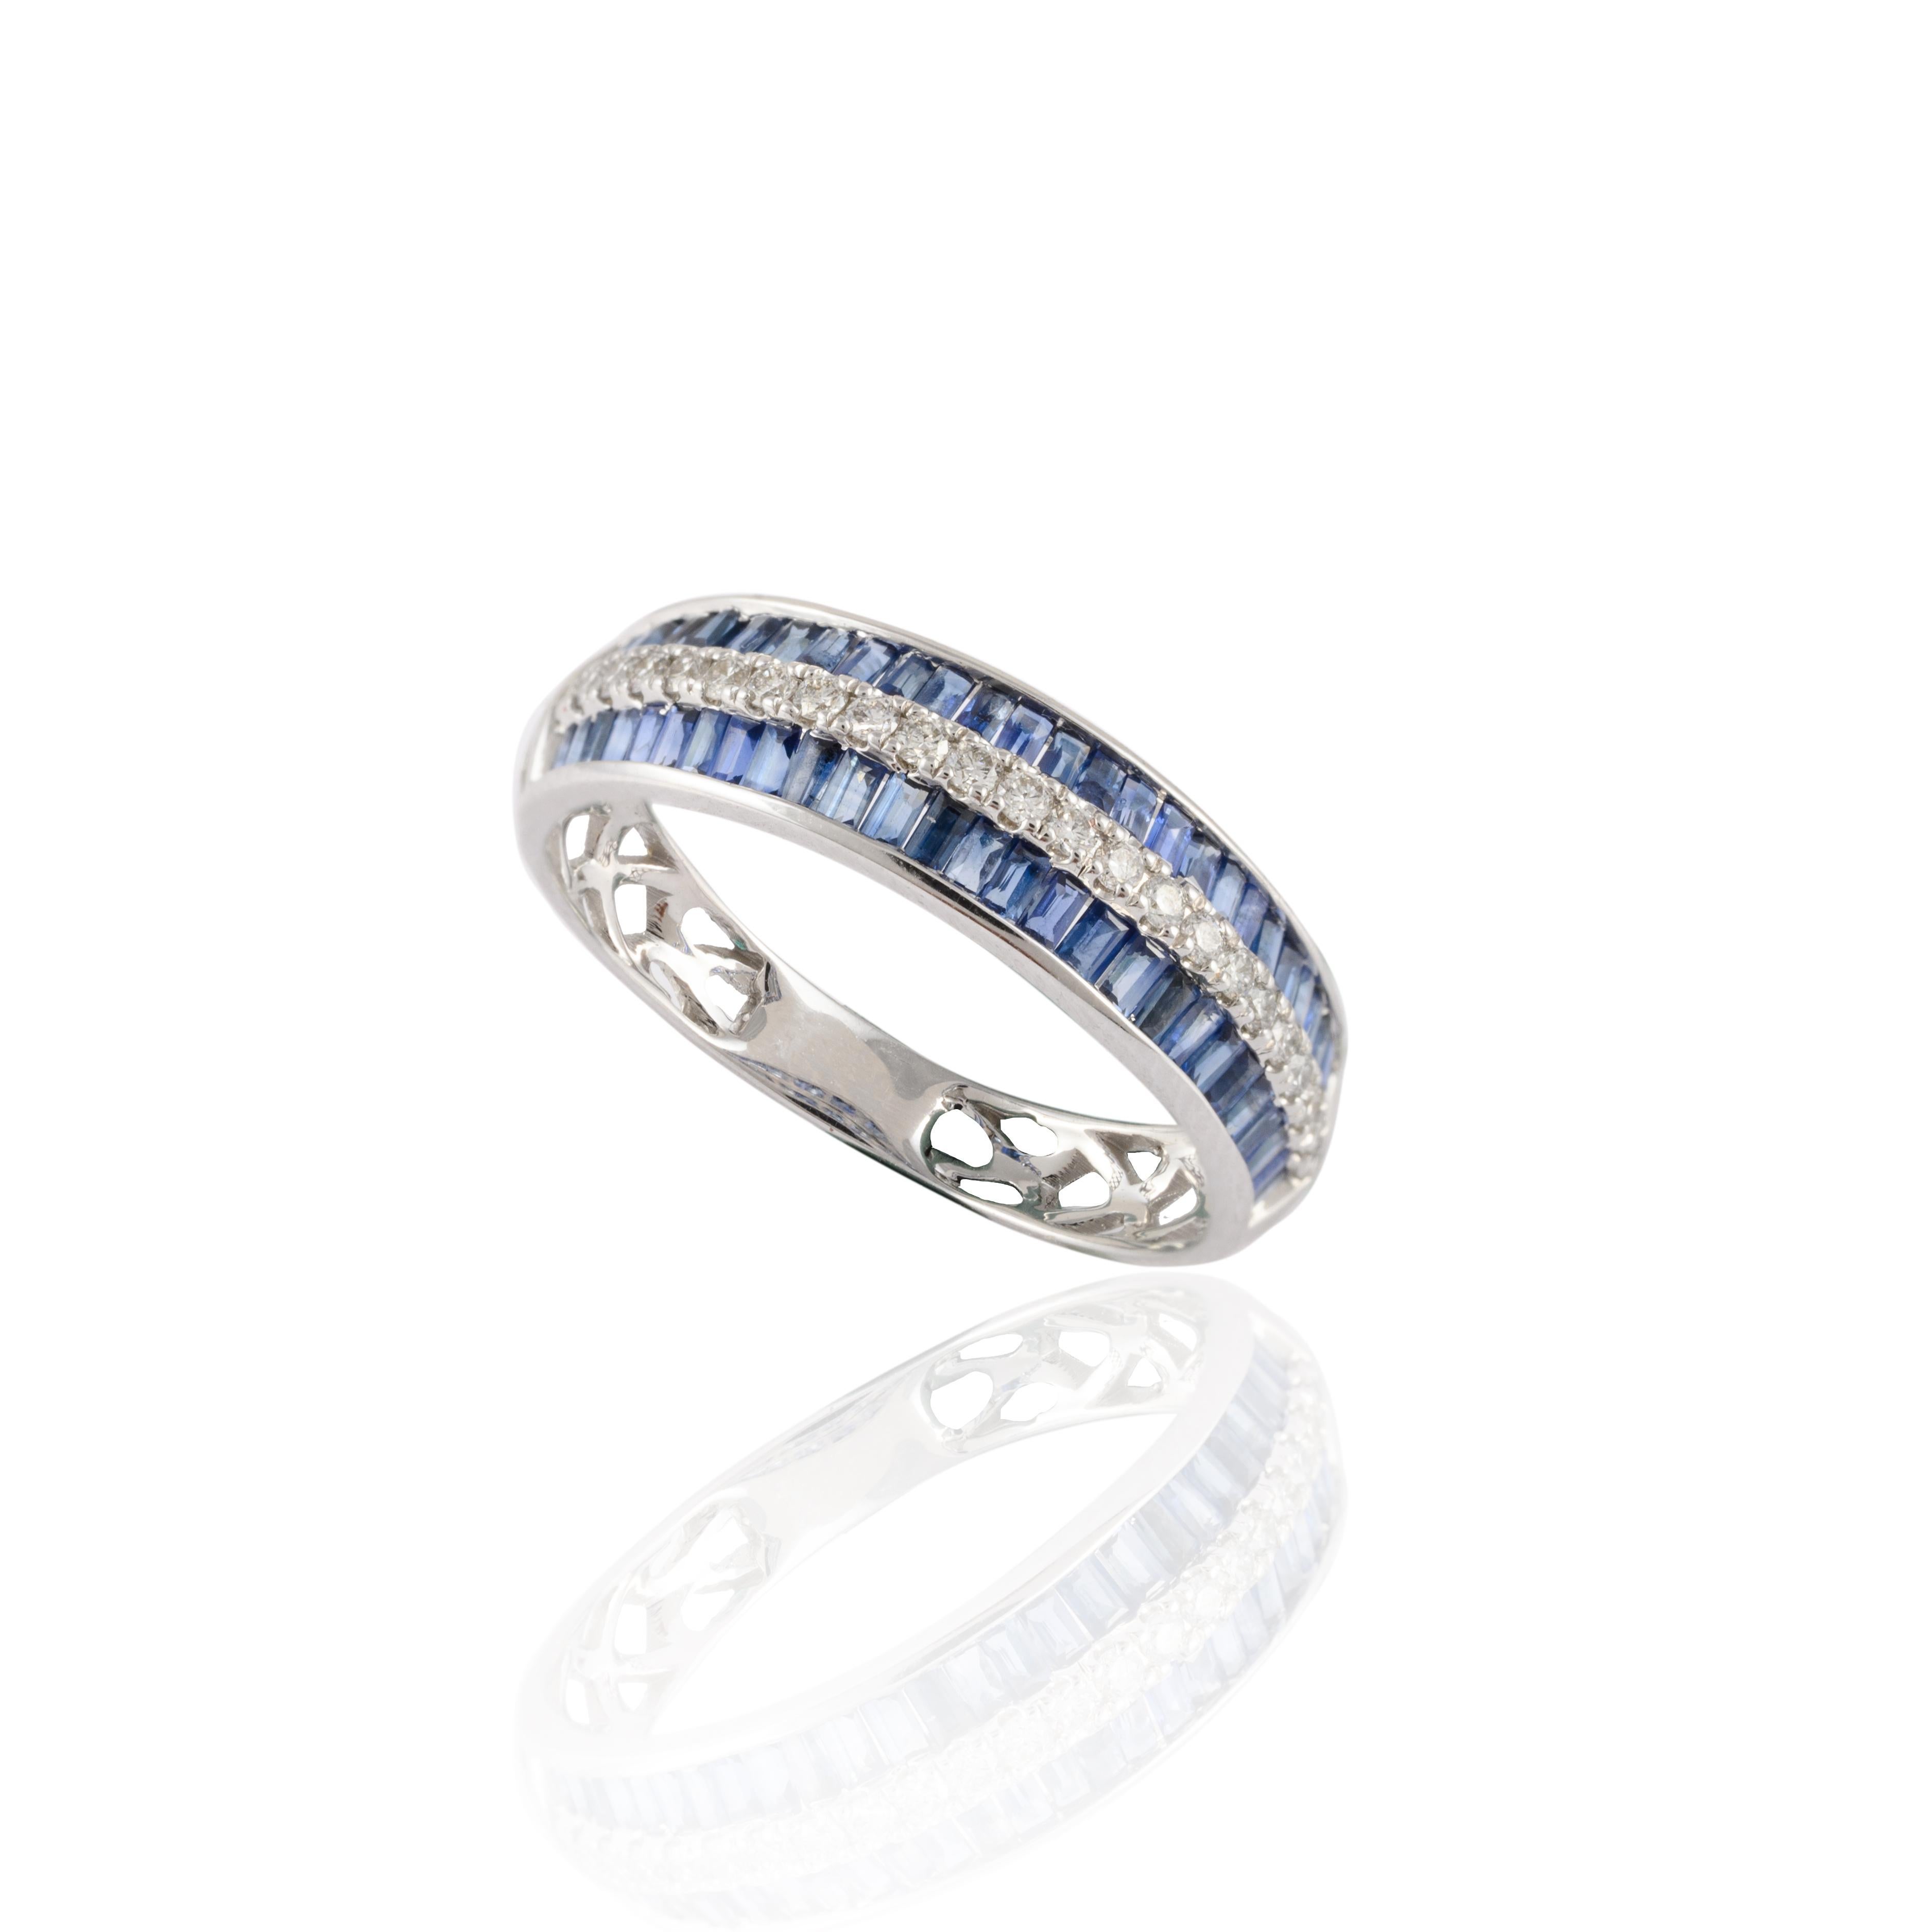 For Sale:  Blue Sapphire Channel Set Wedding Band with Diamonds in 18k Solid White Gold 7